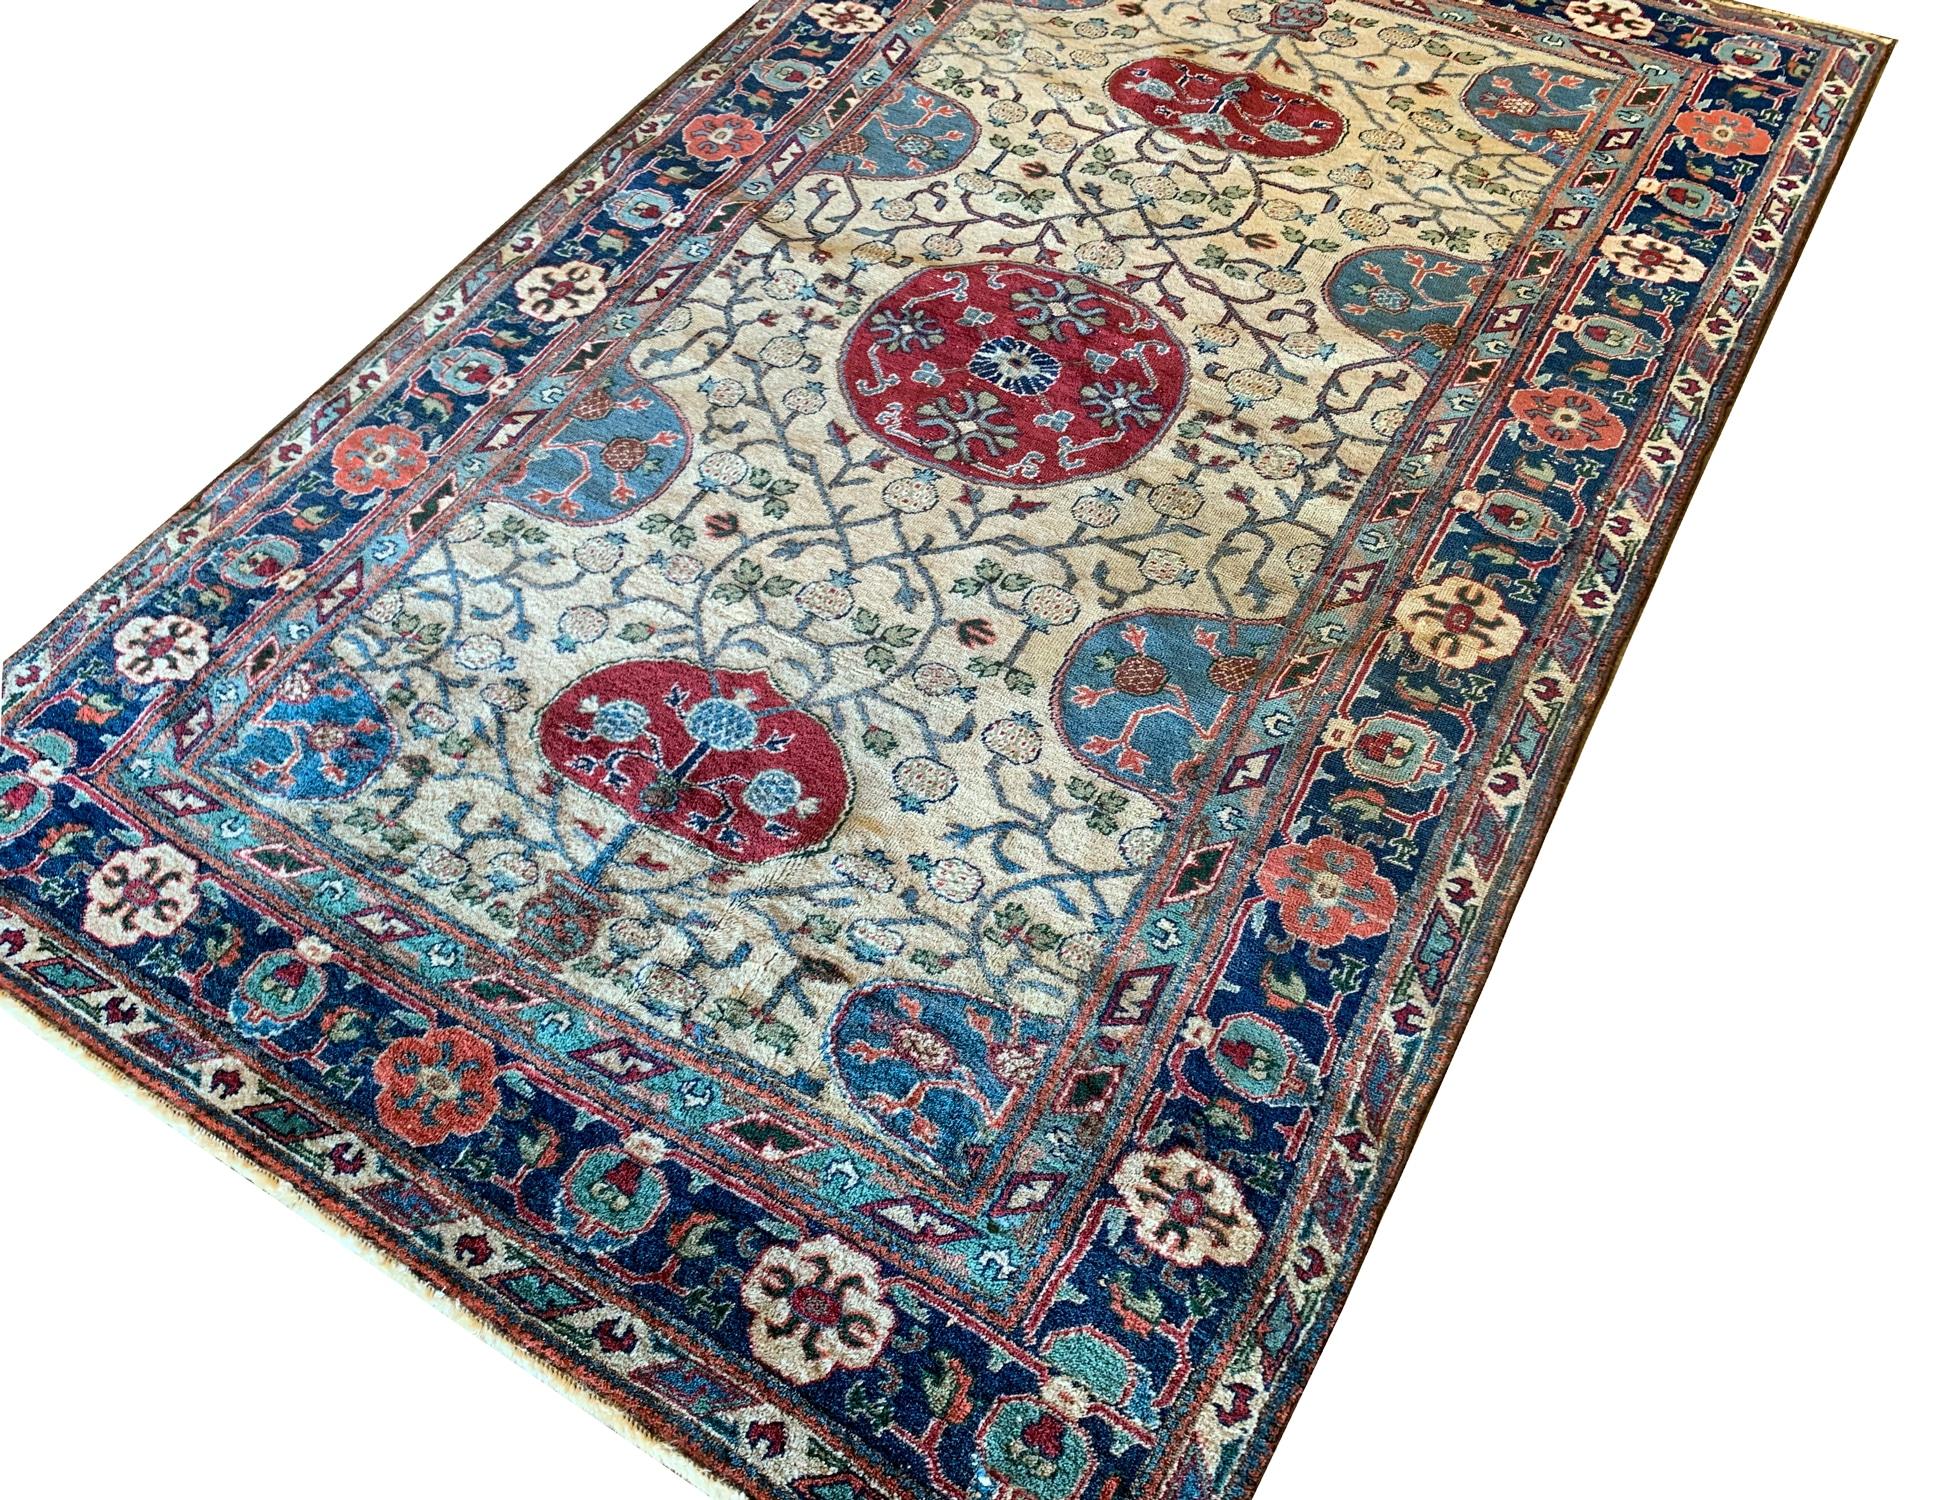 Chinese Antique Collectible Khotan Rug, Turkestan Central Asia 1880s For Sale